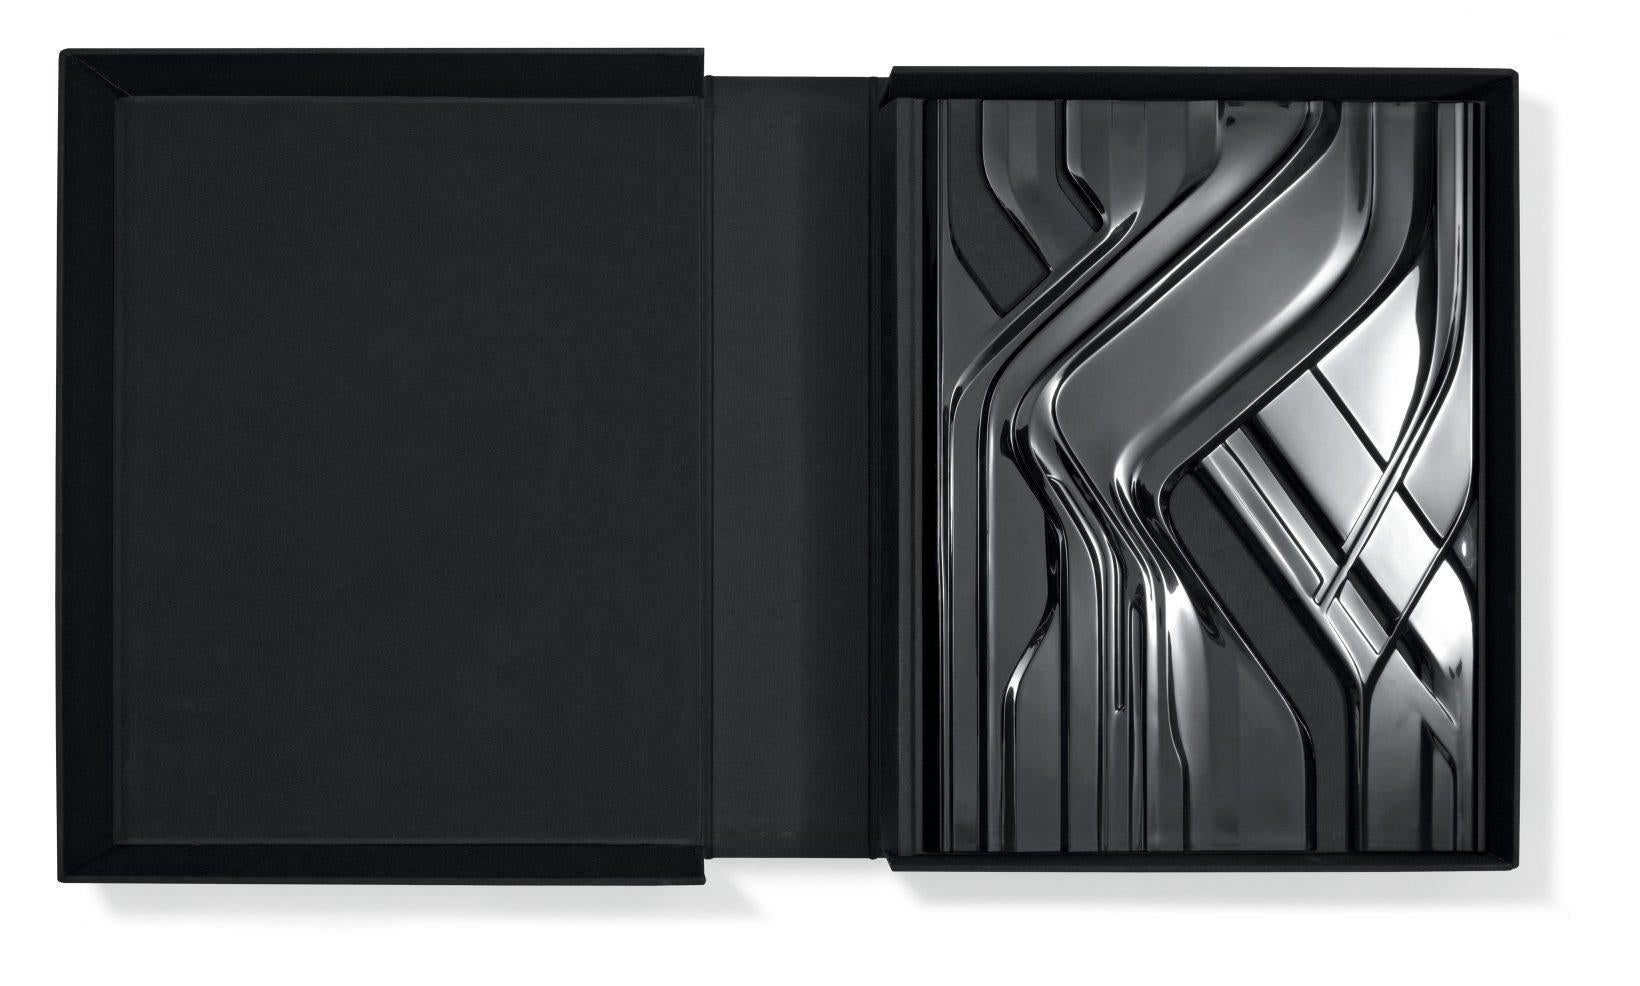 Exceptional Zaha Hadid-signed and designed Art Edition of her complete works from Taschen in 2009. A 600-page XL-oversized book covered by a three dimensional custom made cast and high gloss polish black acrylic cover designed by Hadid and inspired